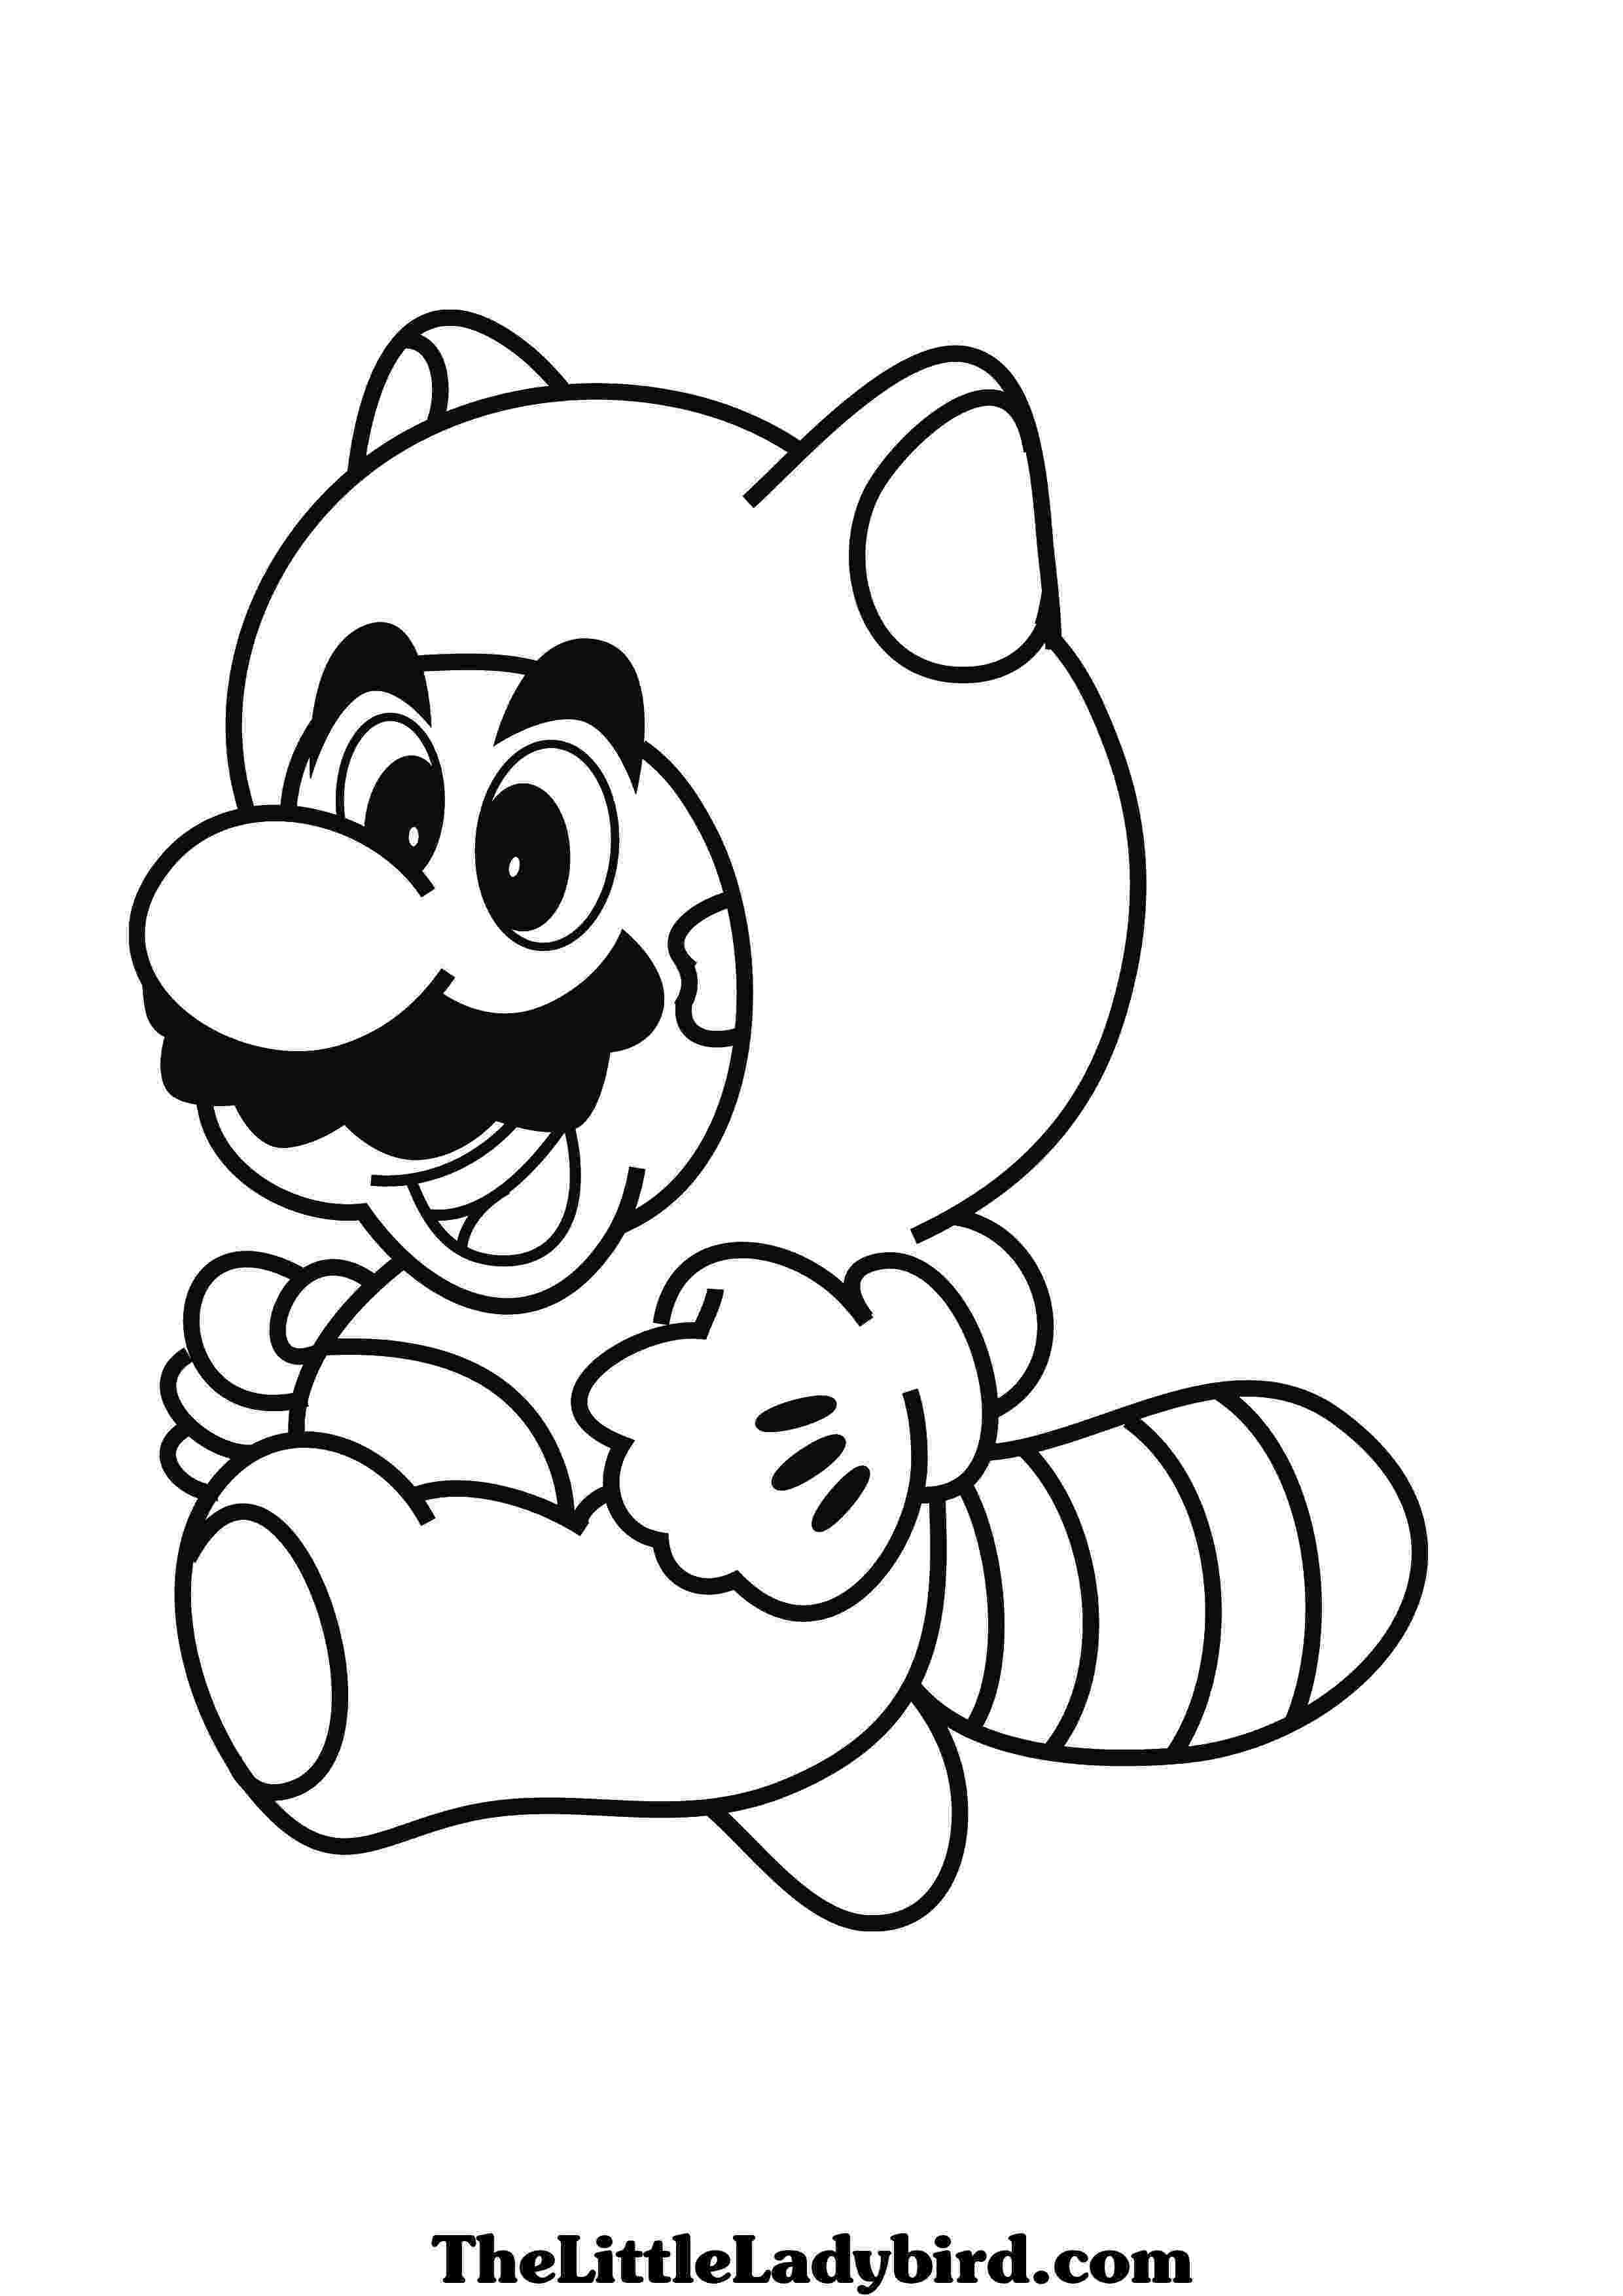 mario pictures official mario coloring pages gonintendo pictures mario 